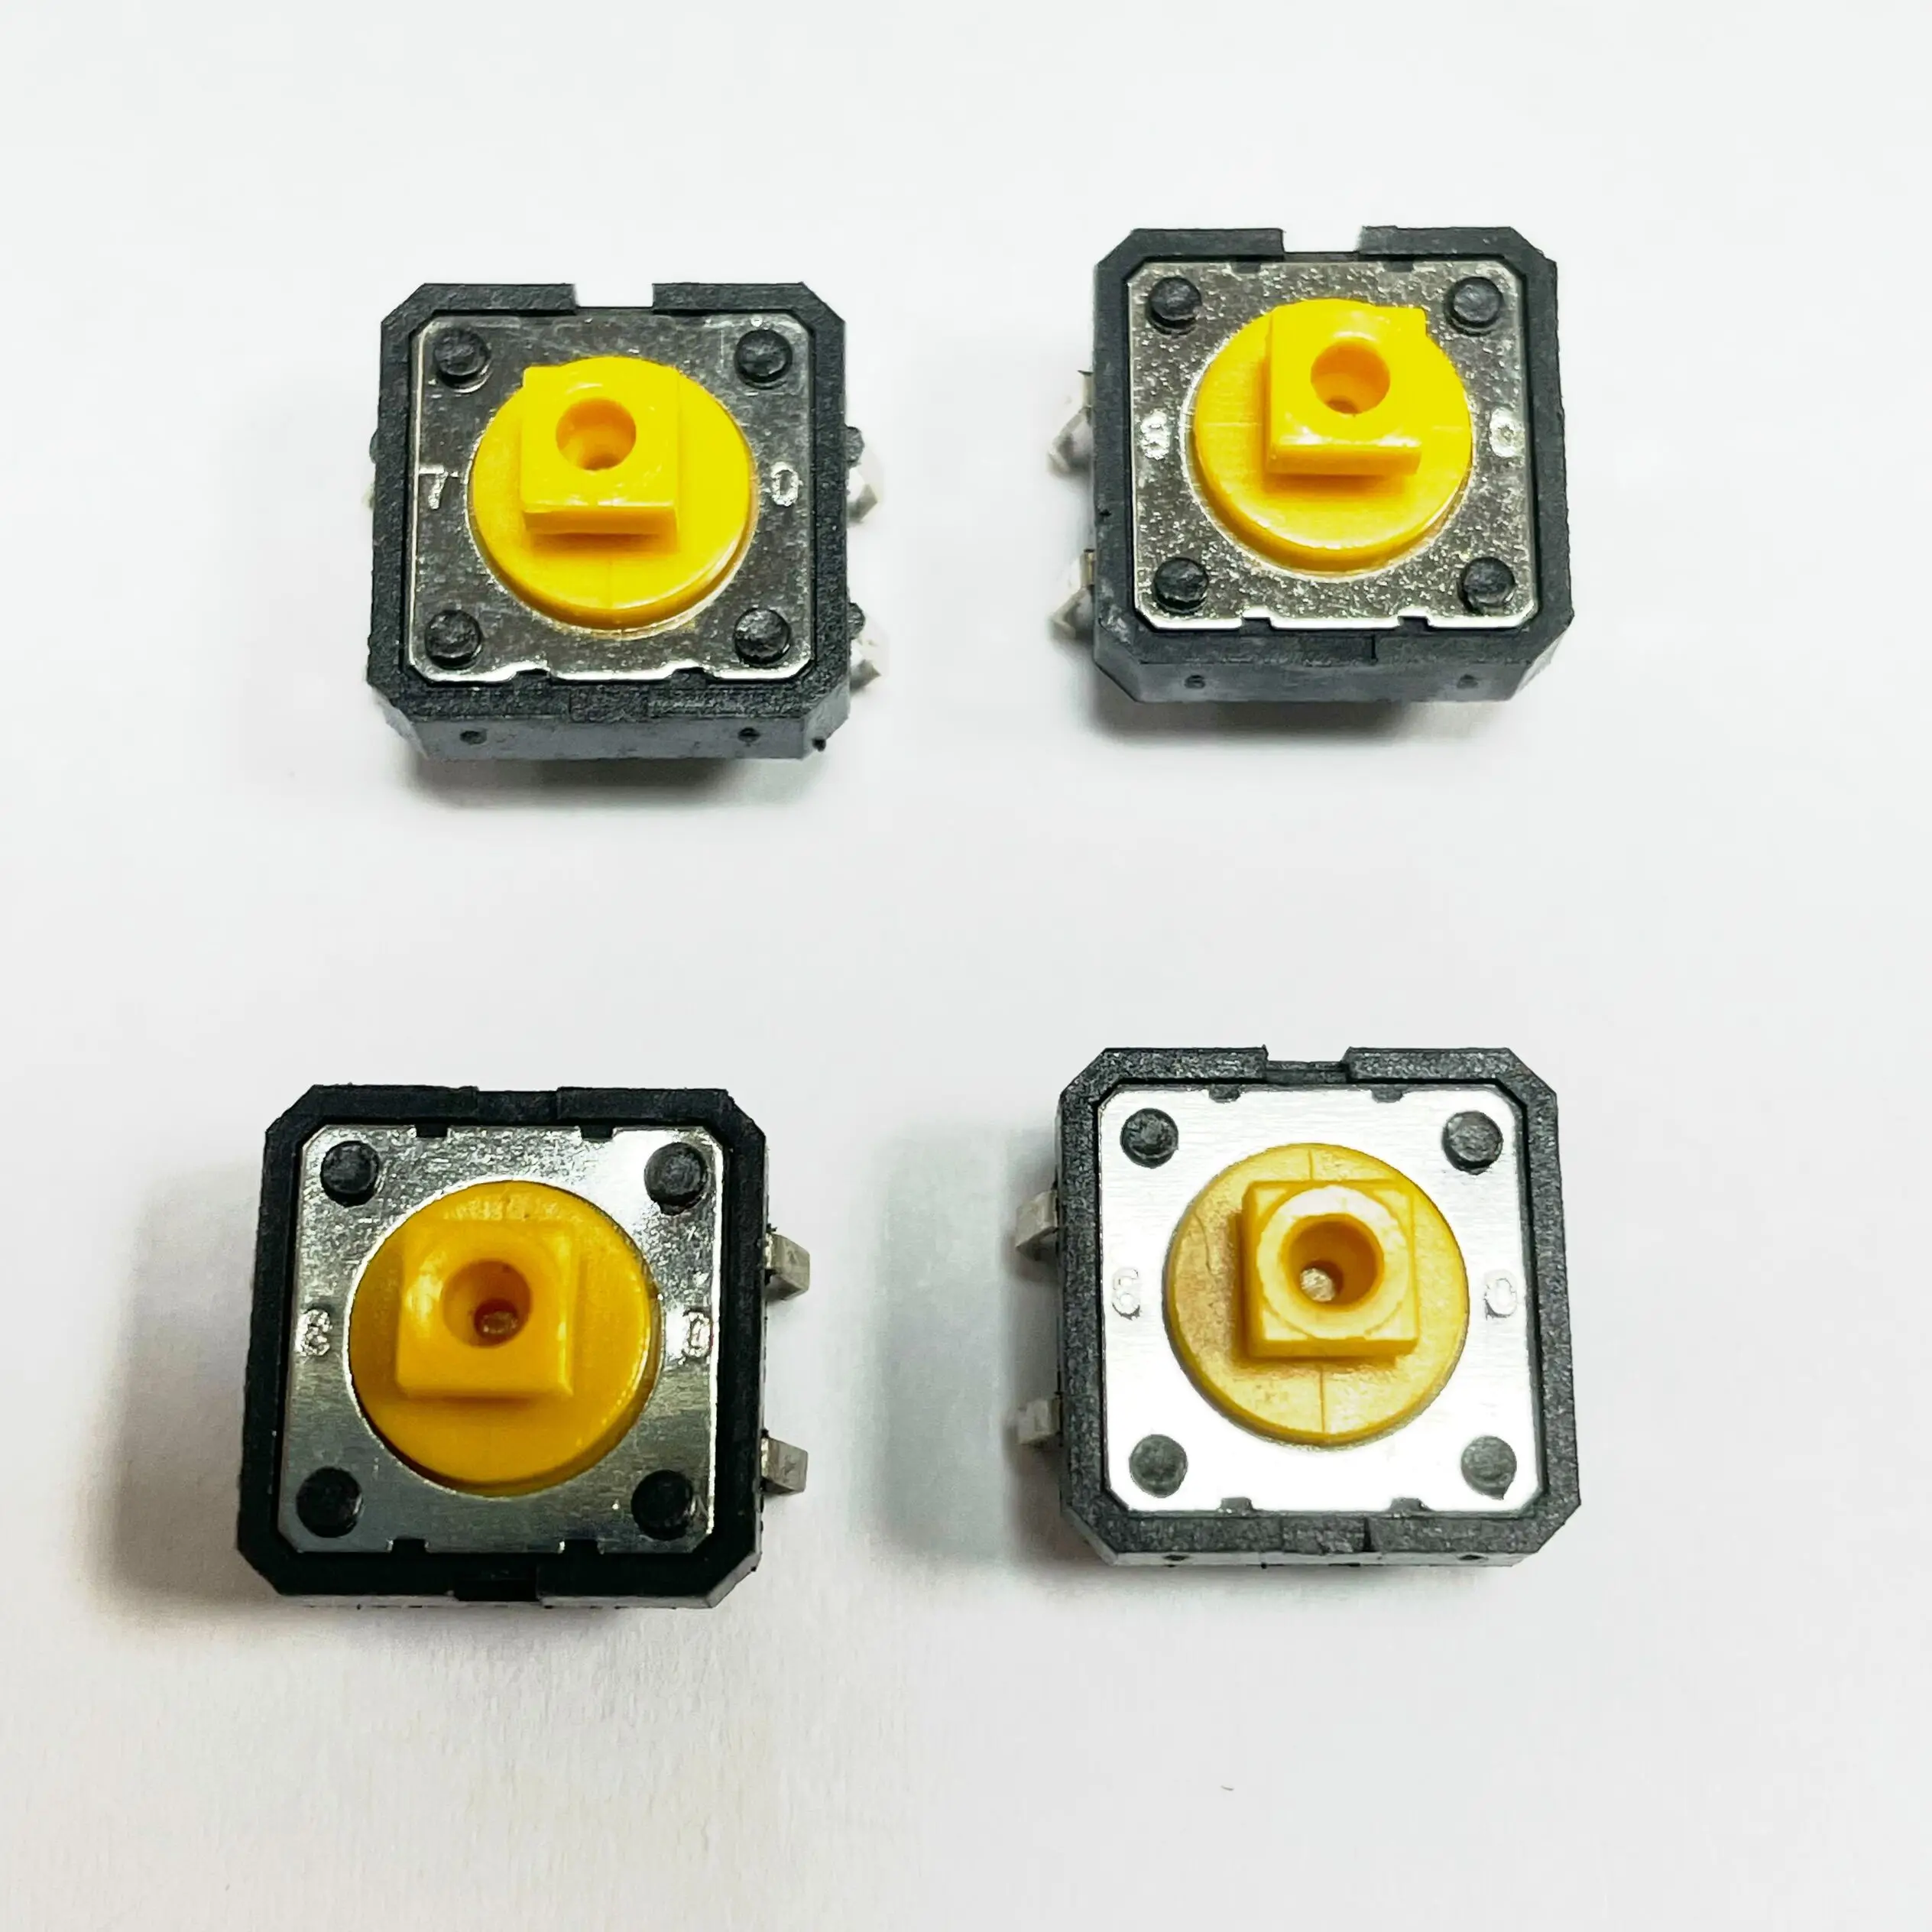 commonly used mixed switch packs tact switches micro switches key switches 12 types in total 10 pieces each component package 5PCS/LOT B3F-4055 12x12x7.3 mm Tactile Switches Yellow Square Push Button Tact Switch 12*12*7.3 mm Micro switch